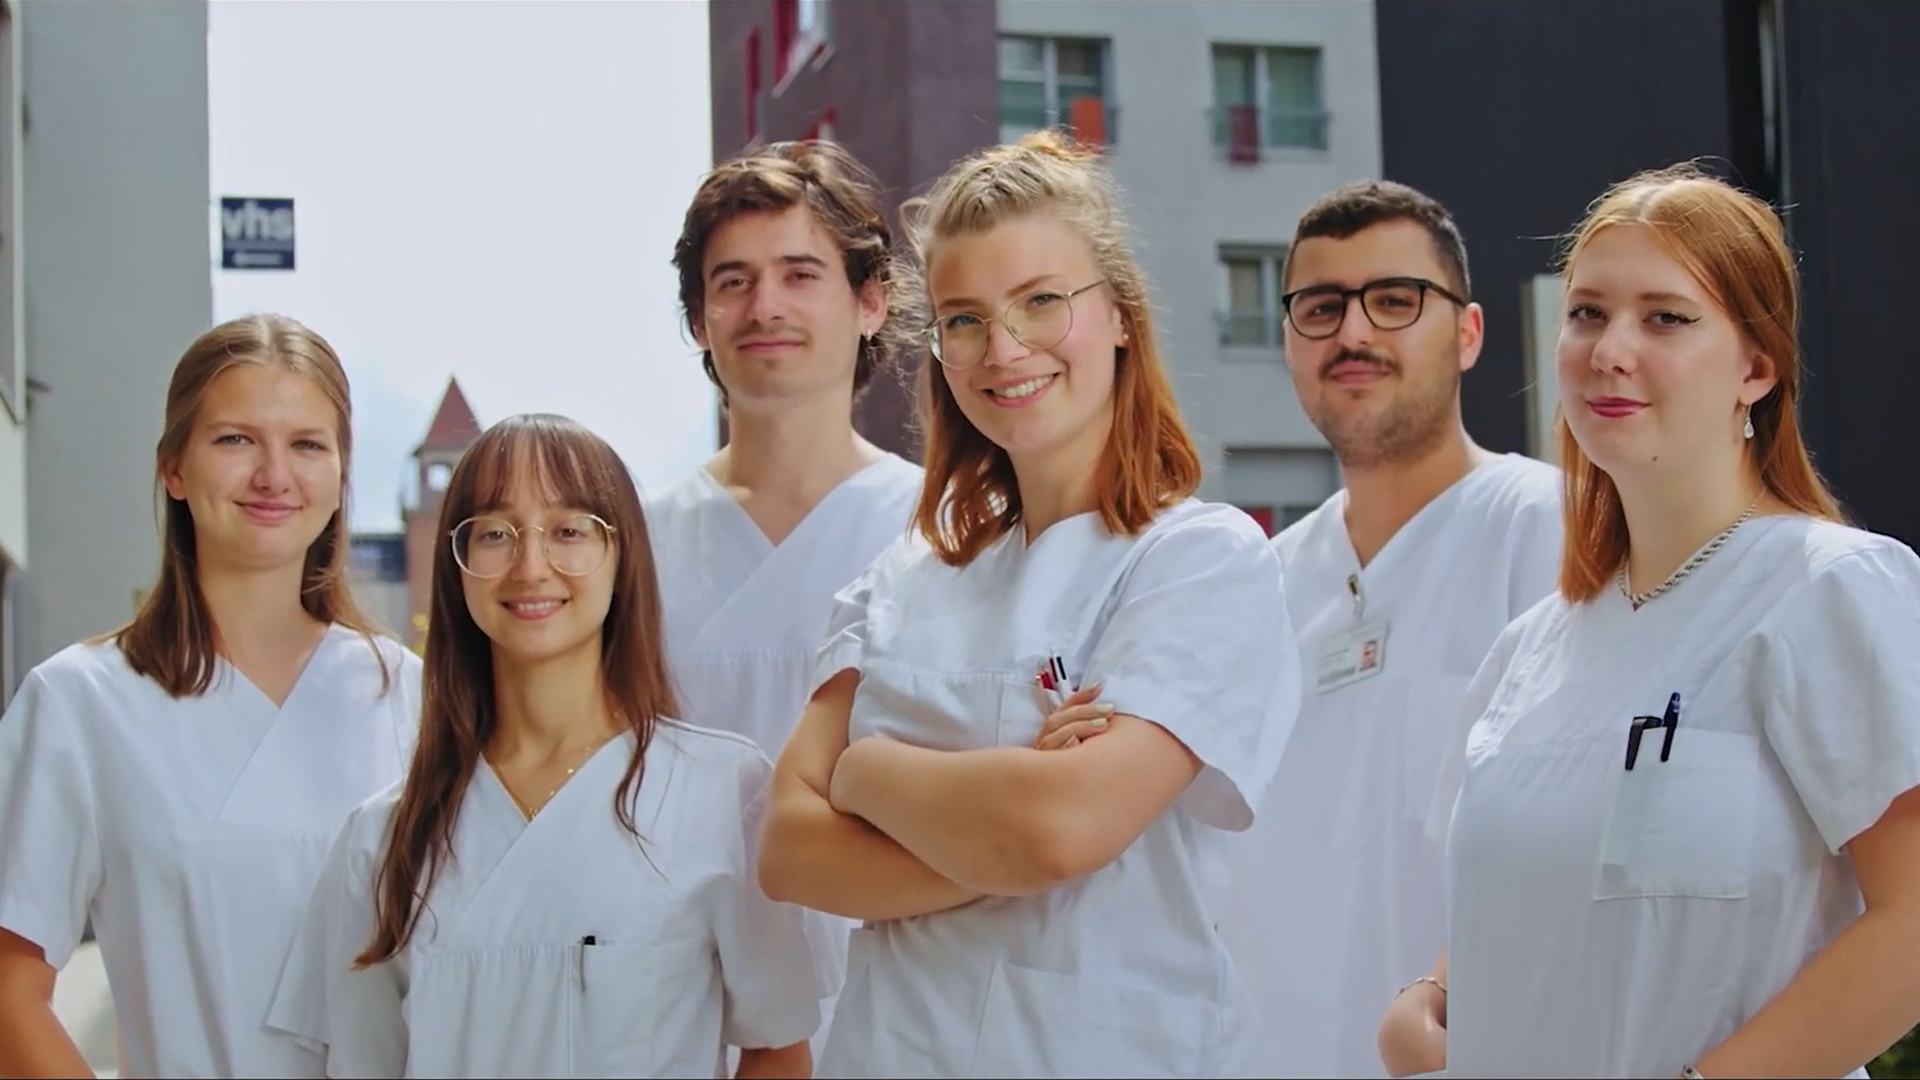 Together with other students, you will receive the theoretical and practical training to work in nursing.